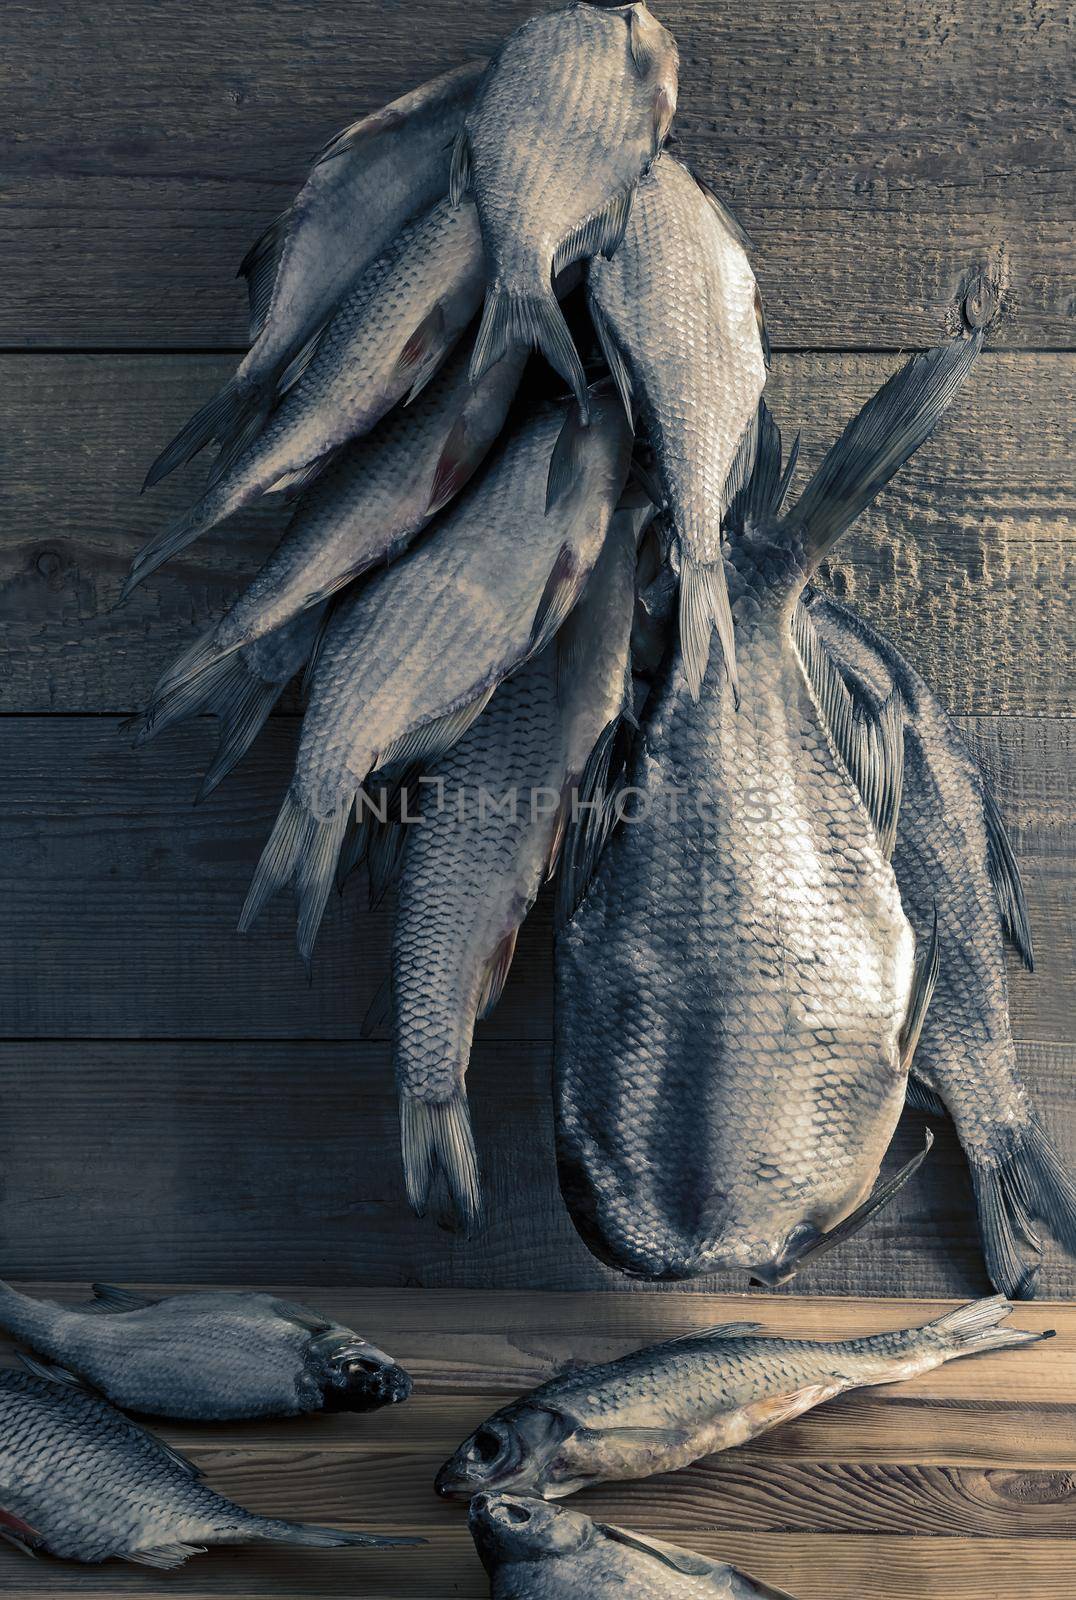 On the rope hangs a dried roach for further drying, next to the table is dry fish. Presented on a wooden background.